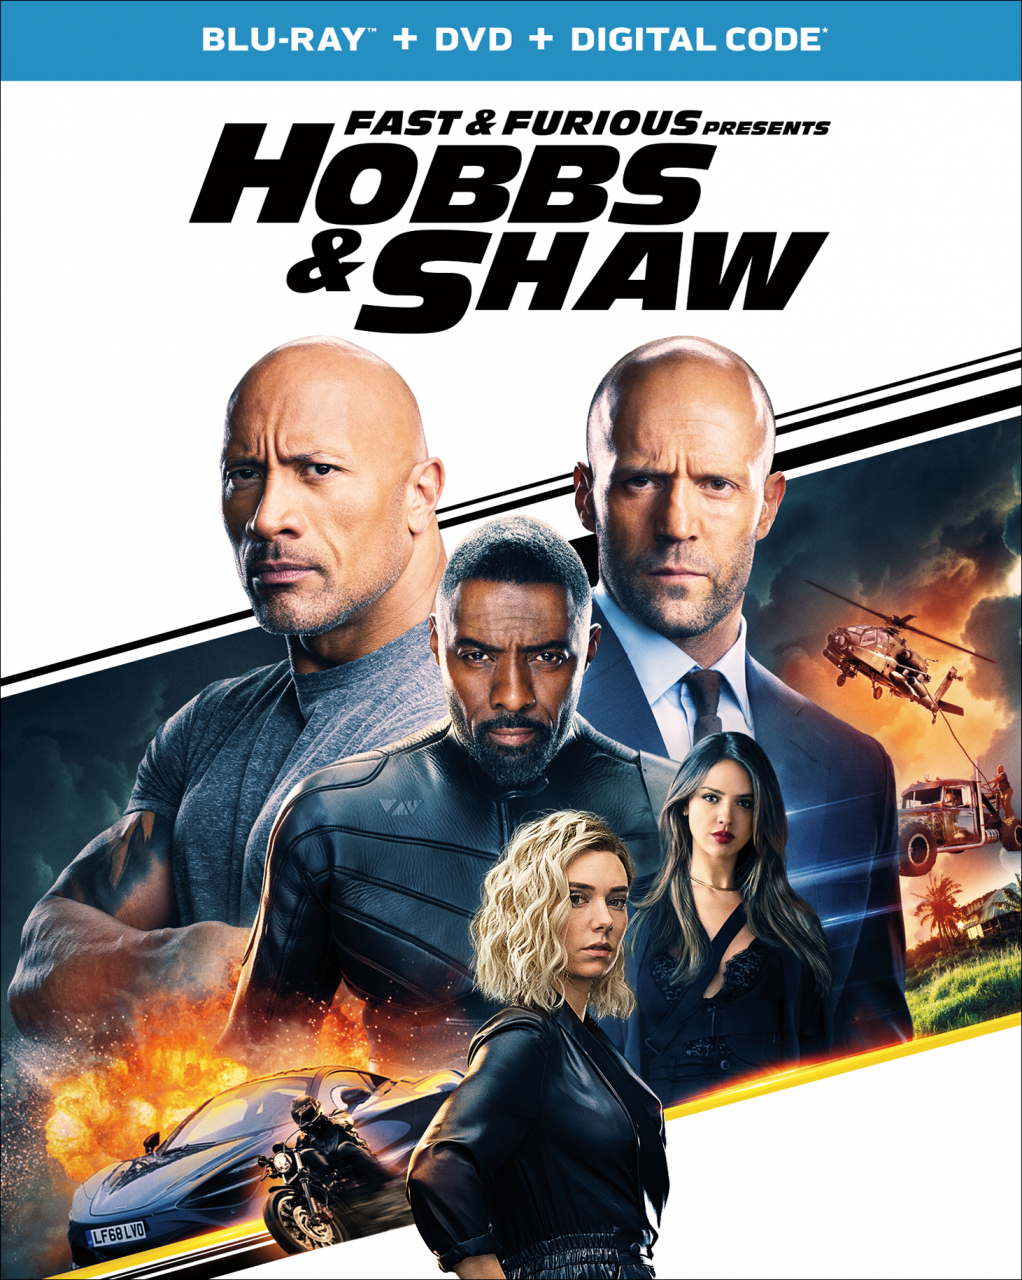 Fast & Furious presents Hobbs & Shaw Blu-Ray Combo Pack cover (Universal Pictures Home Entertainment)